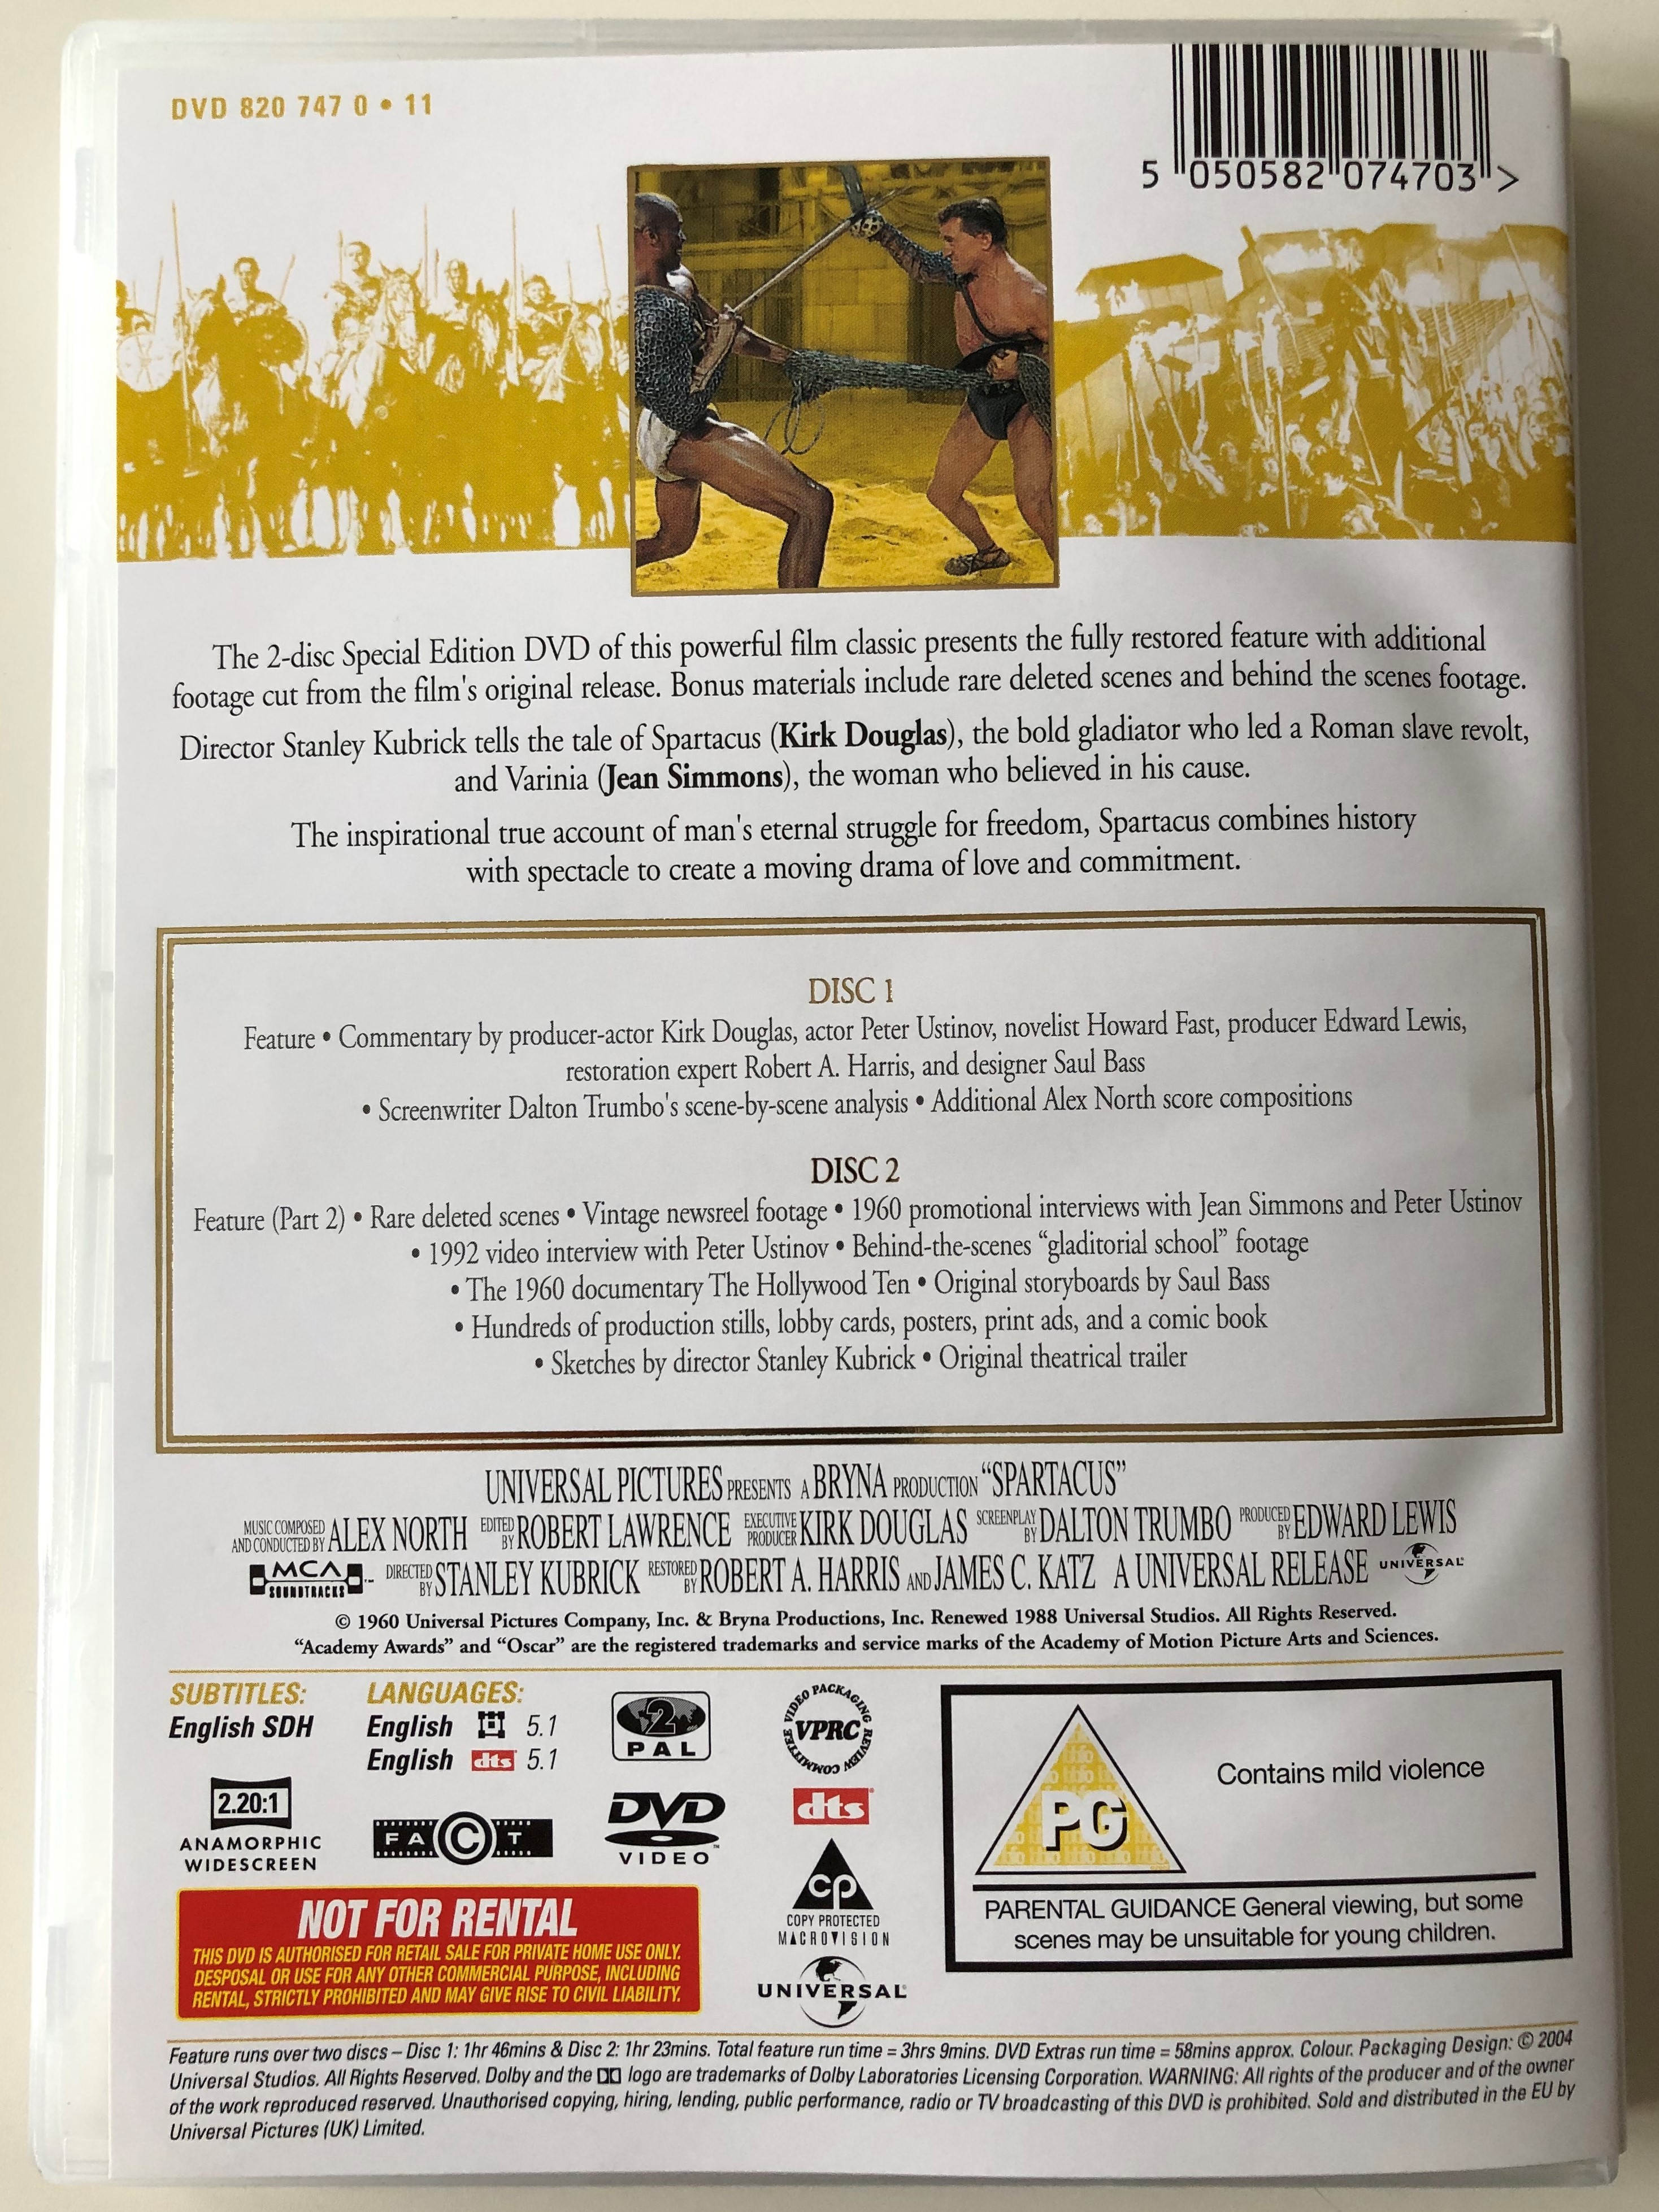 Spartacus 1960 DVD 2-disc special edition / Directed by Stanley Kubrick /  Starring: Kirk Douglas, Laurence Olivier, Jean Simmons, Charles Laughton,  Tony Curtis - bibleinmylanguage